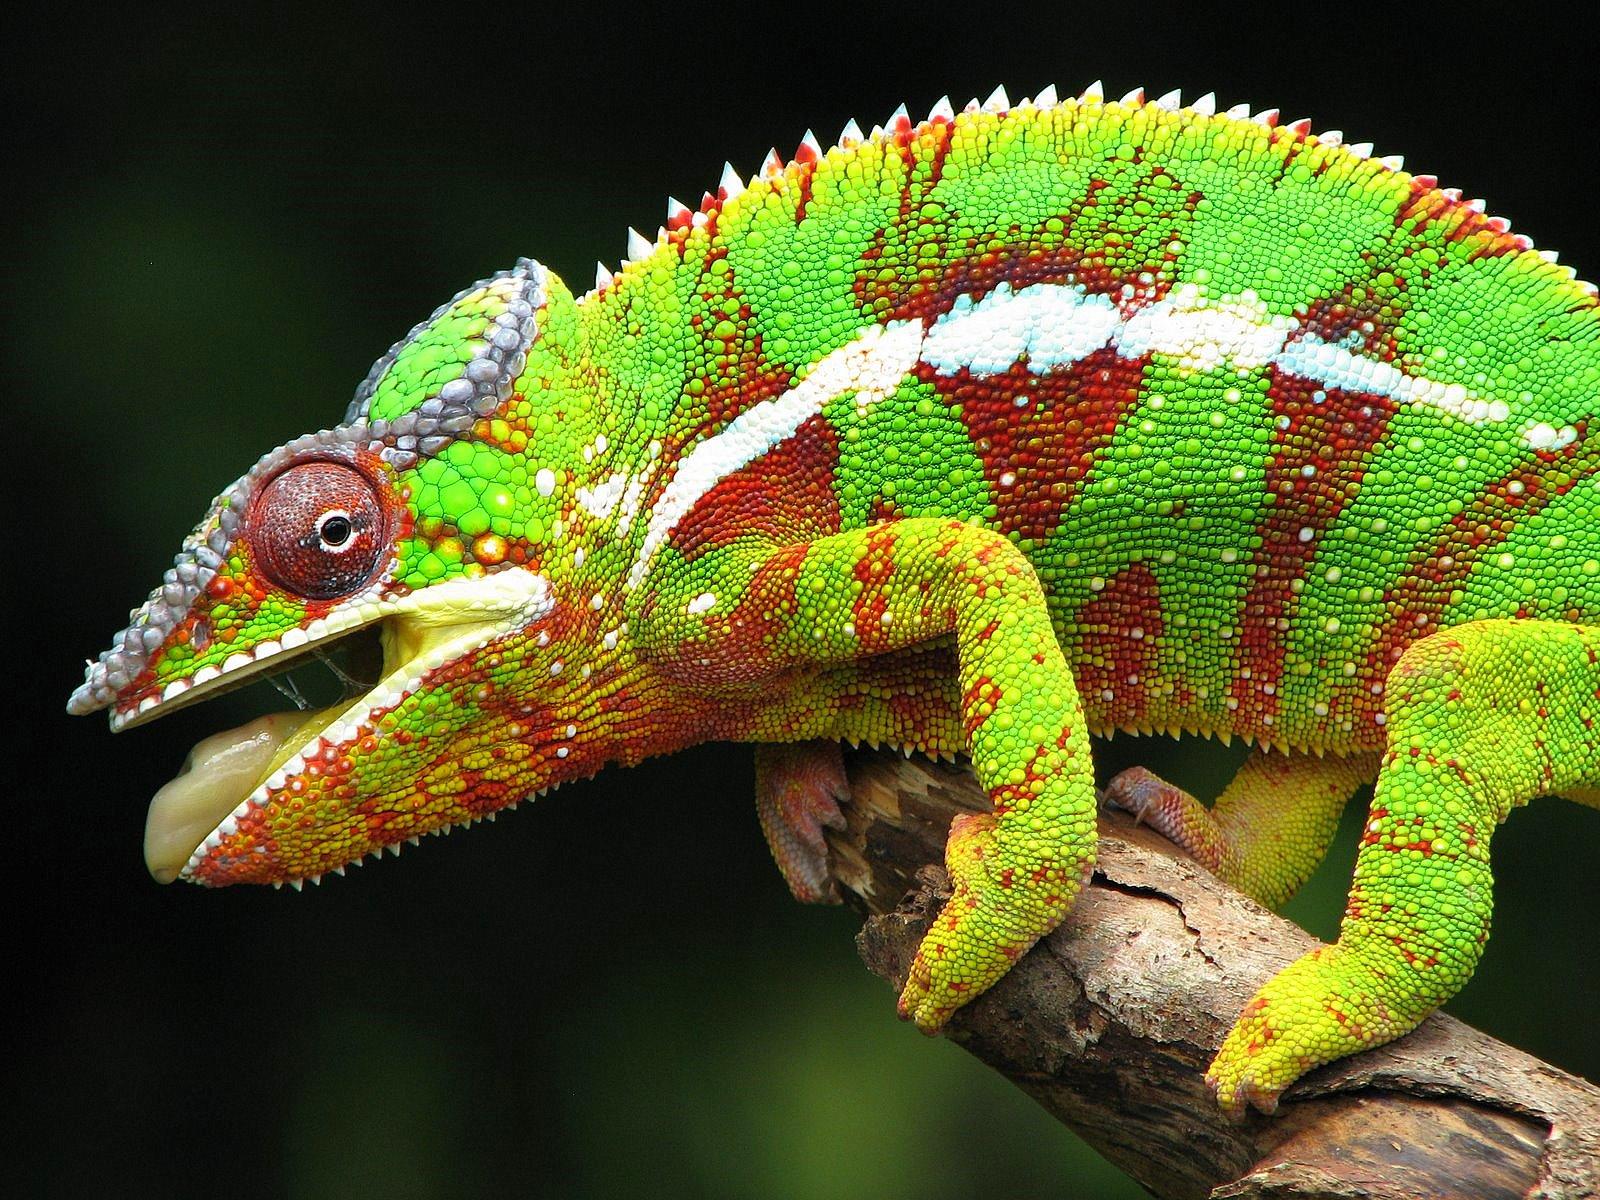 Beautiful and colorful Panther Chameleon picture. Amazing